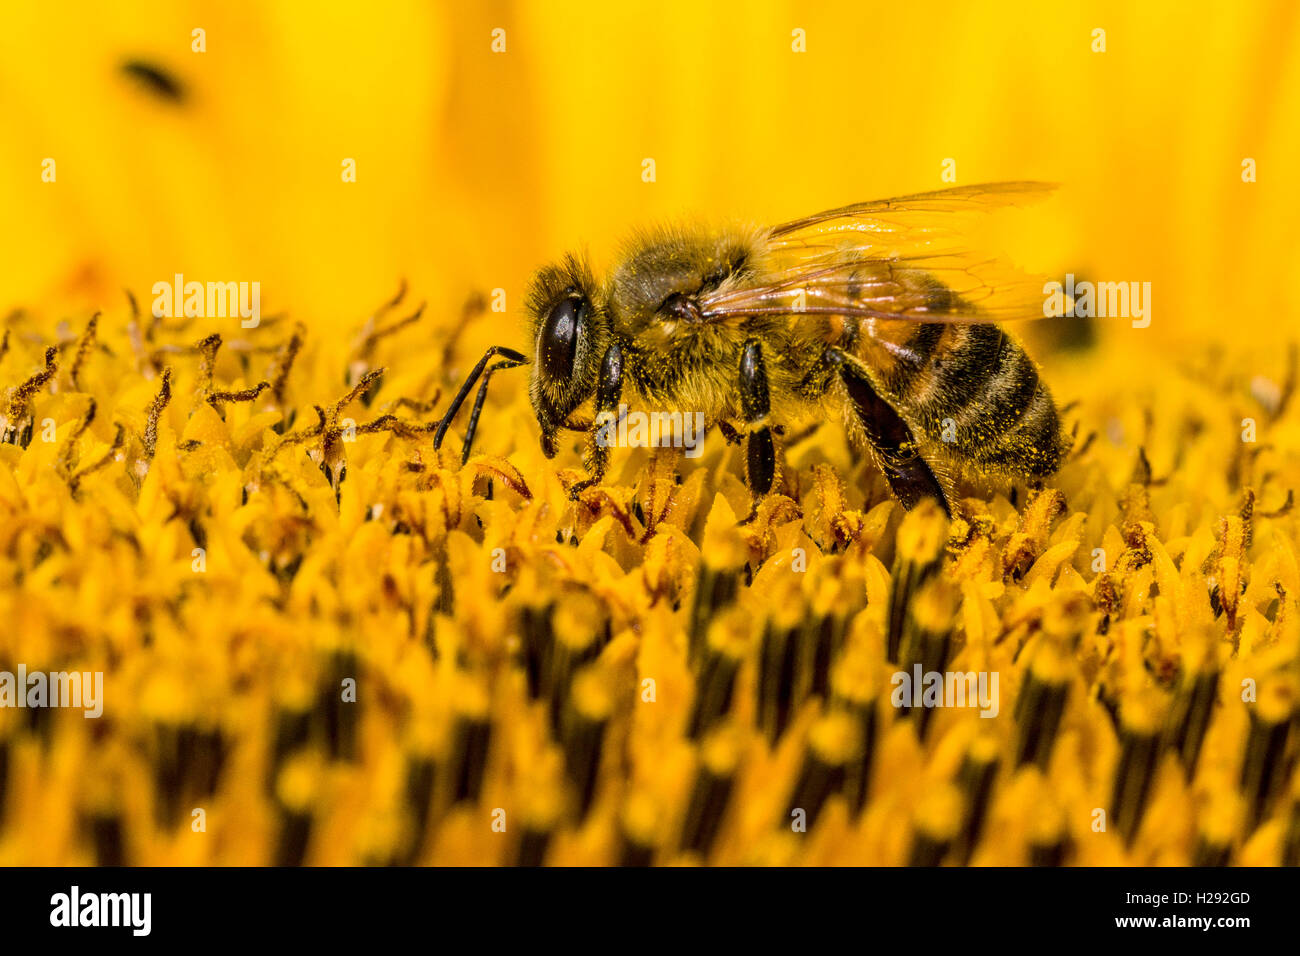 Carniolan honey bee (Apis mellifera carnica) is collecting nectar at a common sunflower (Helianthus annuus) blossom, Saxony Stock Photo